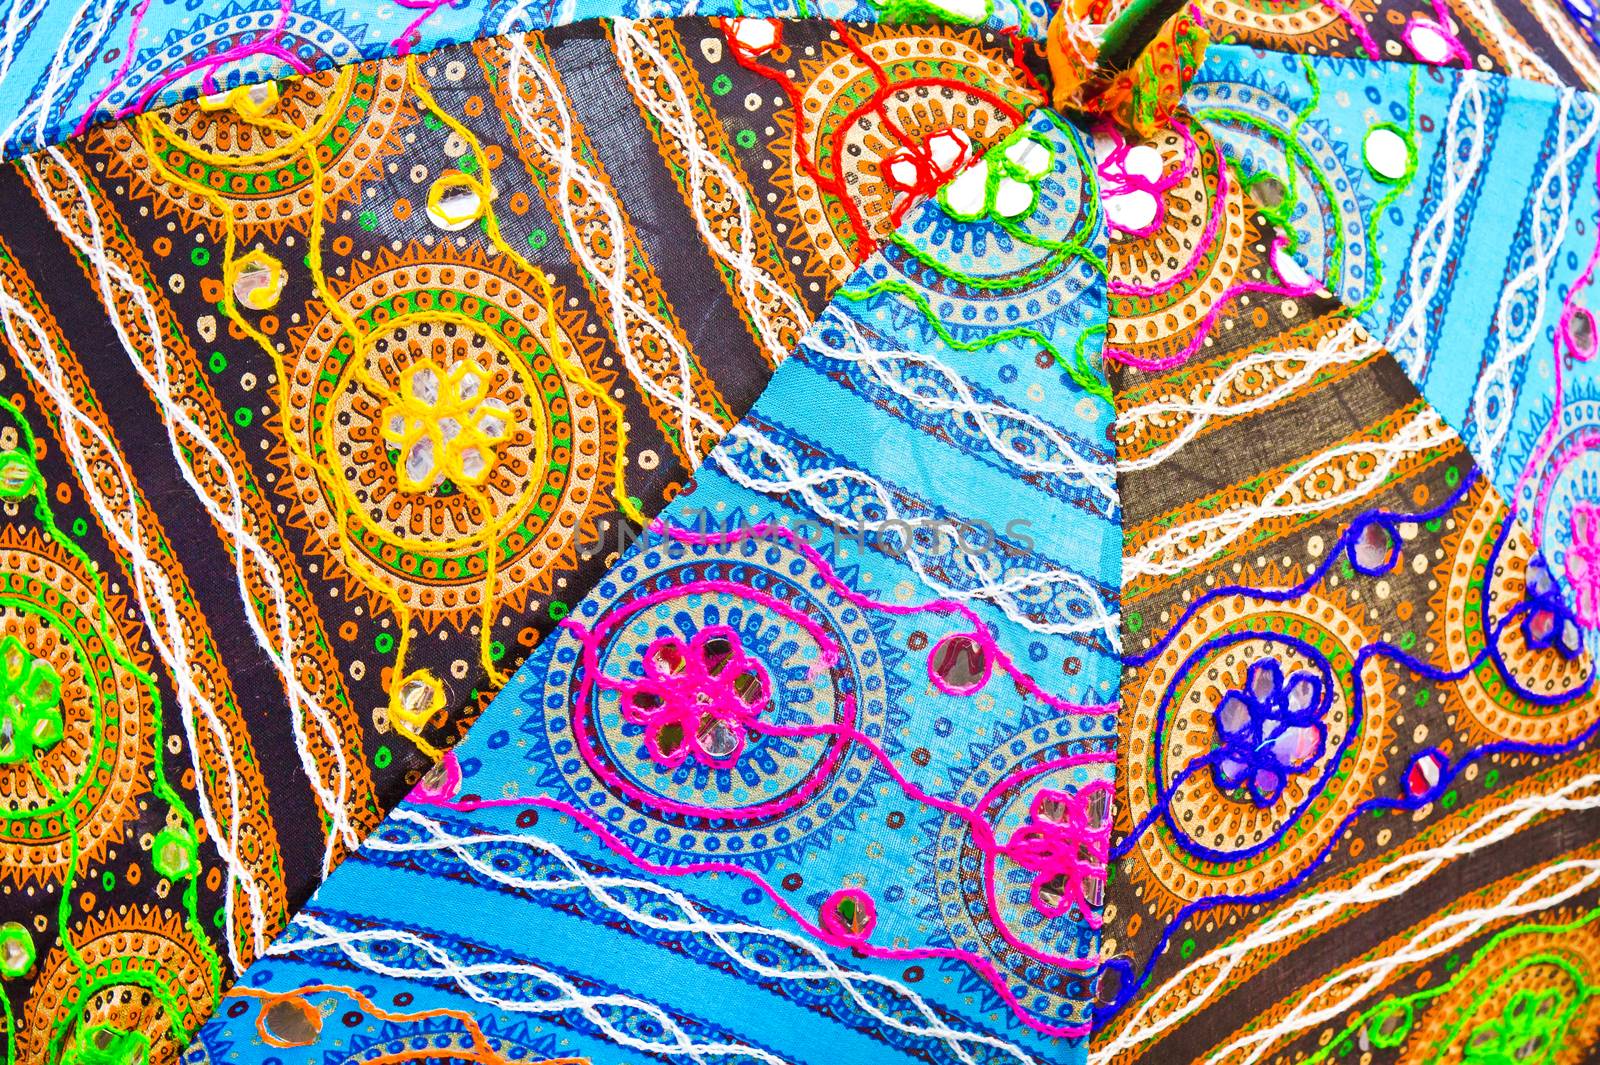 Part of an umbrella made from colorful indian cloth